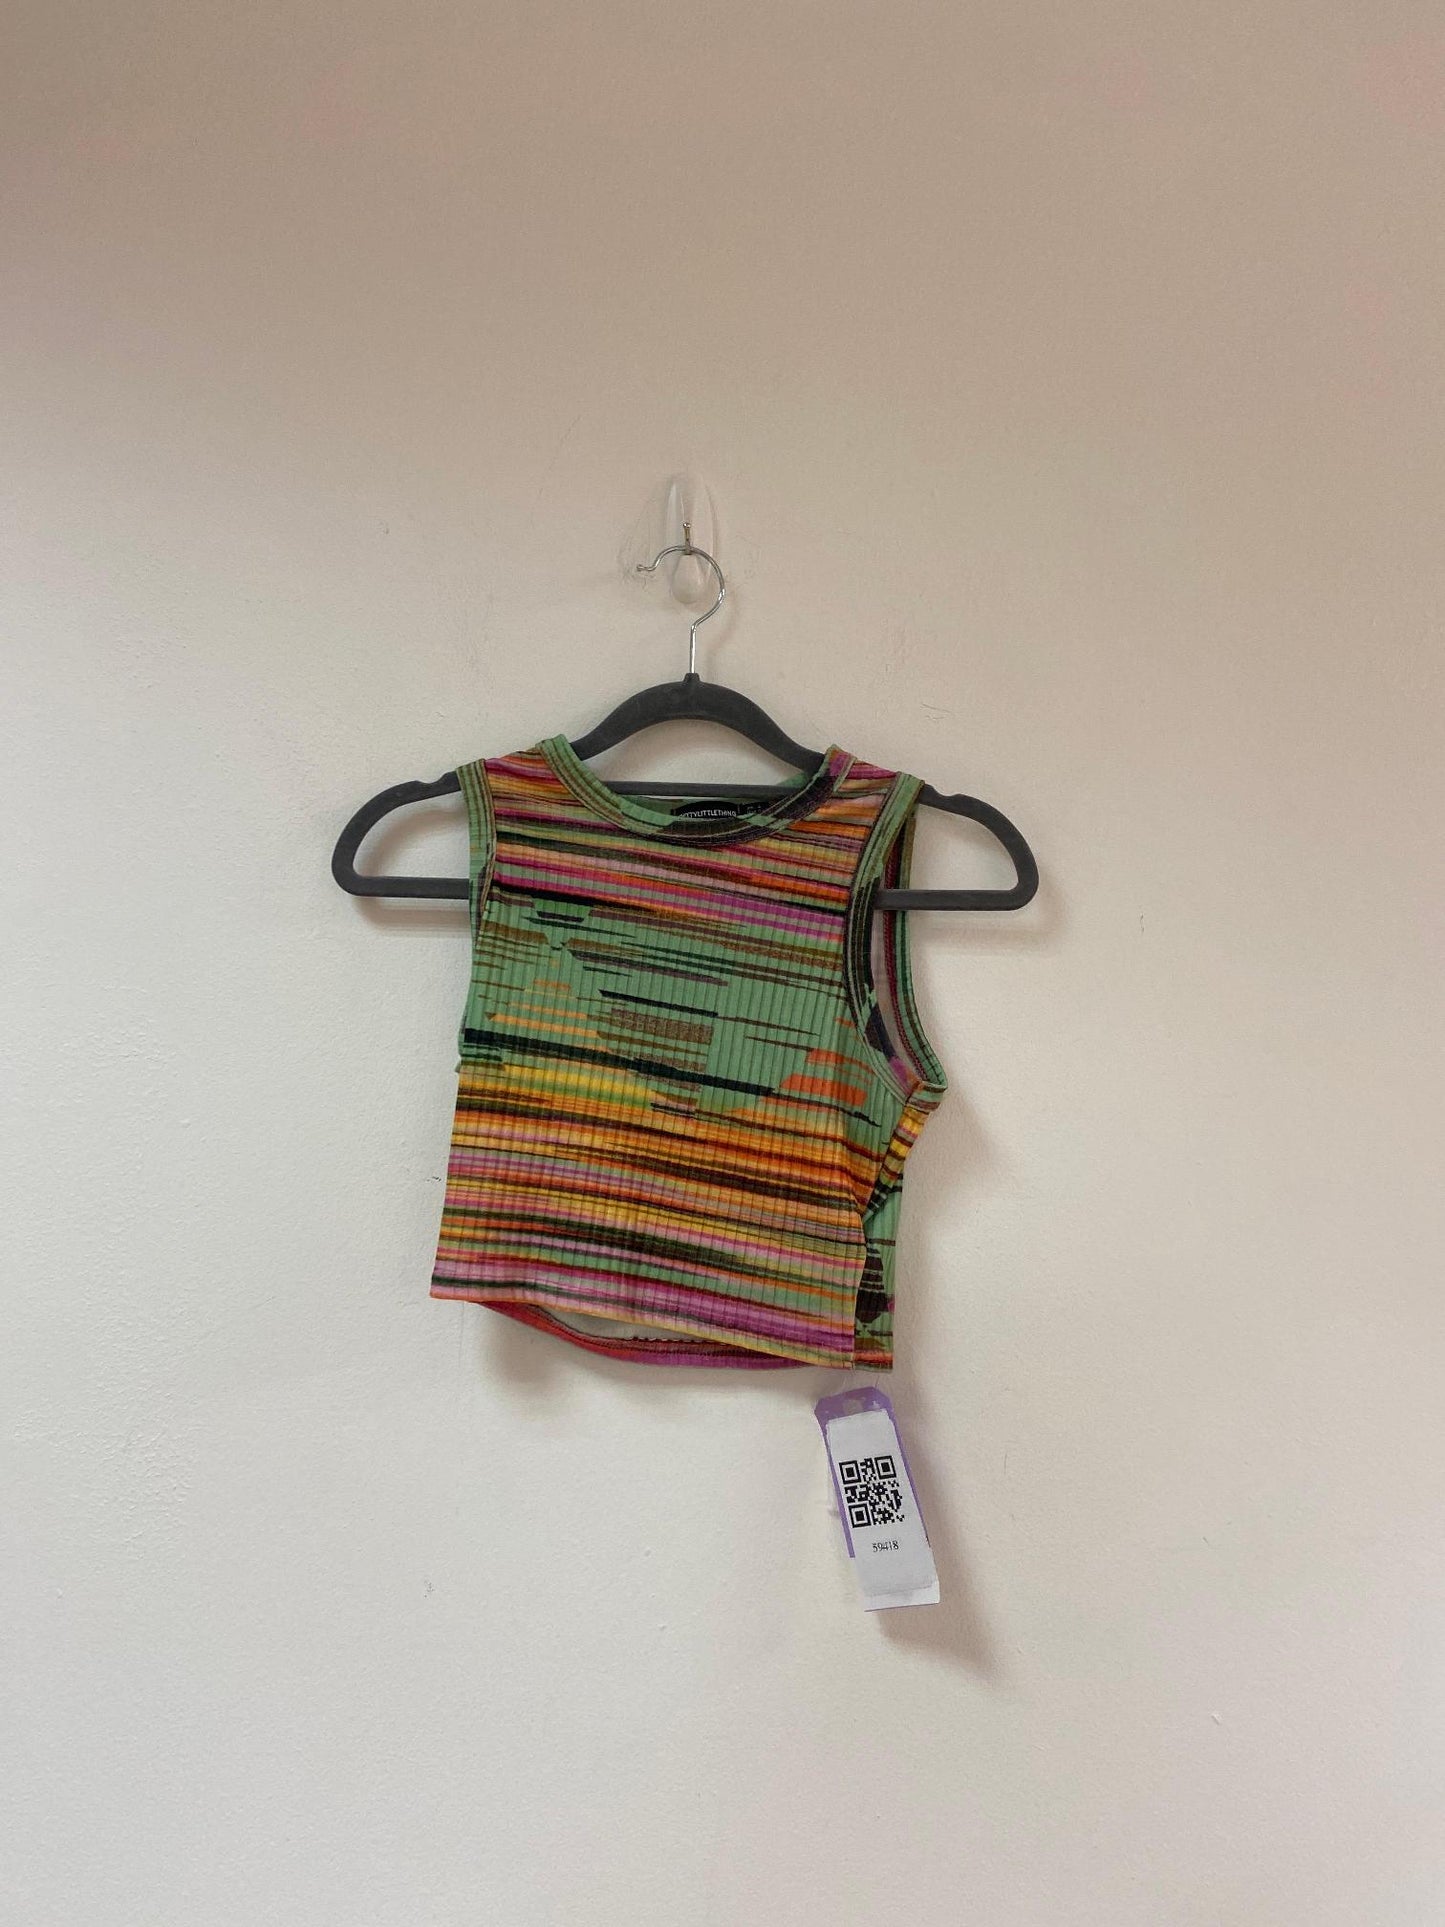 Multicoloured Cropped Racer Top, Pretty Little Thing, Size 4 (Polyester, Elastane)